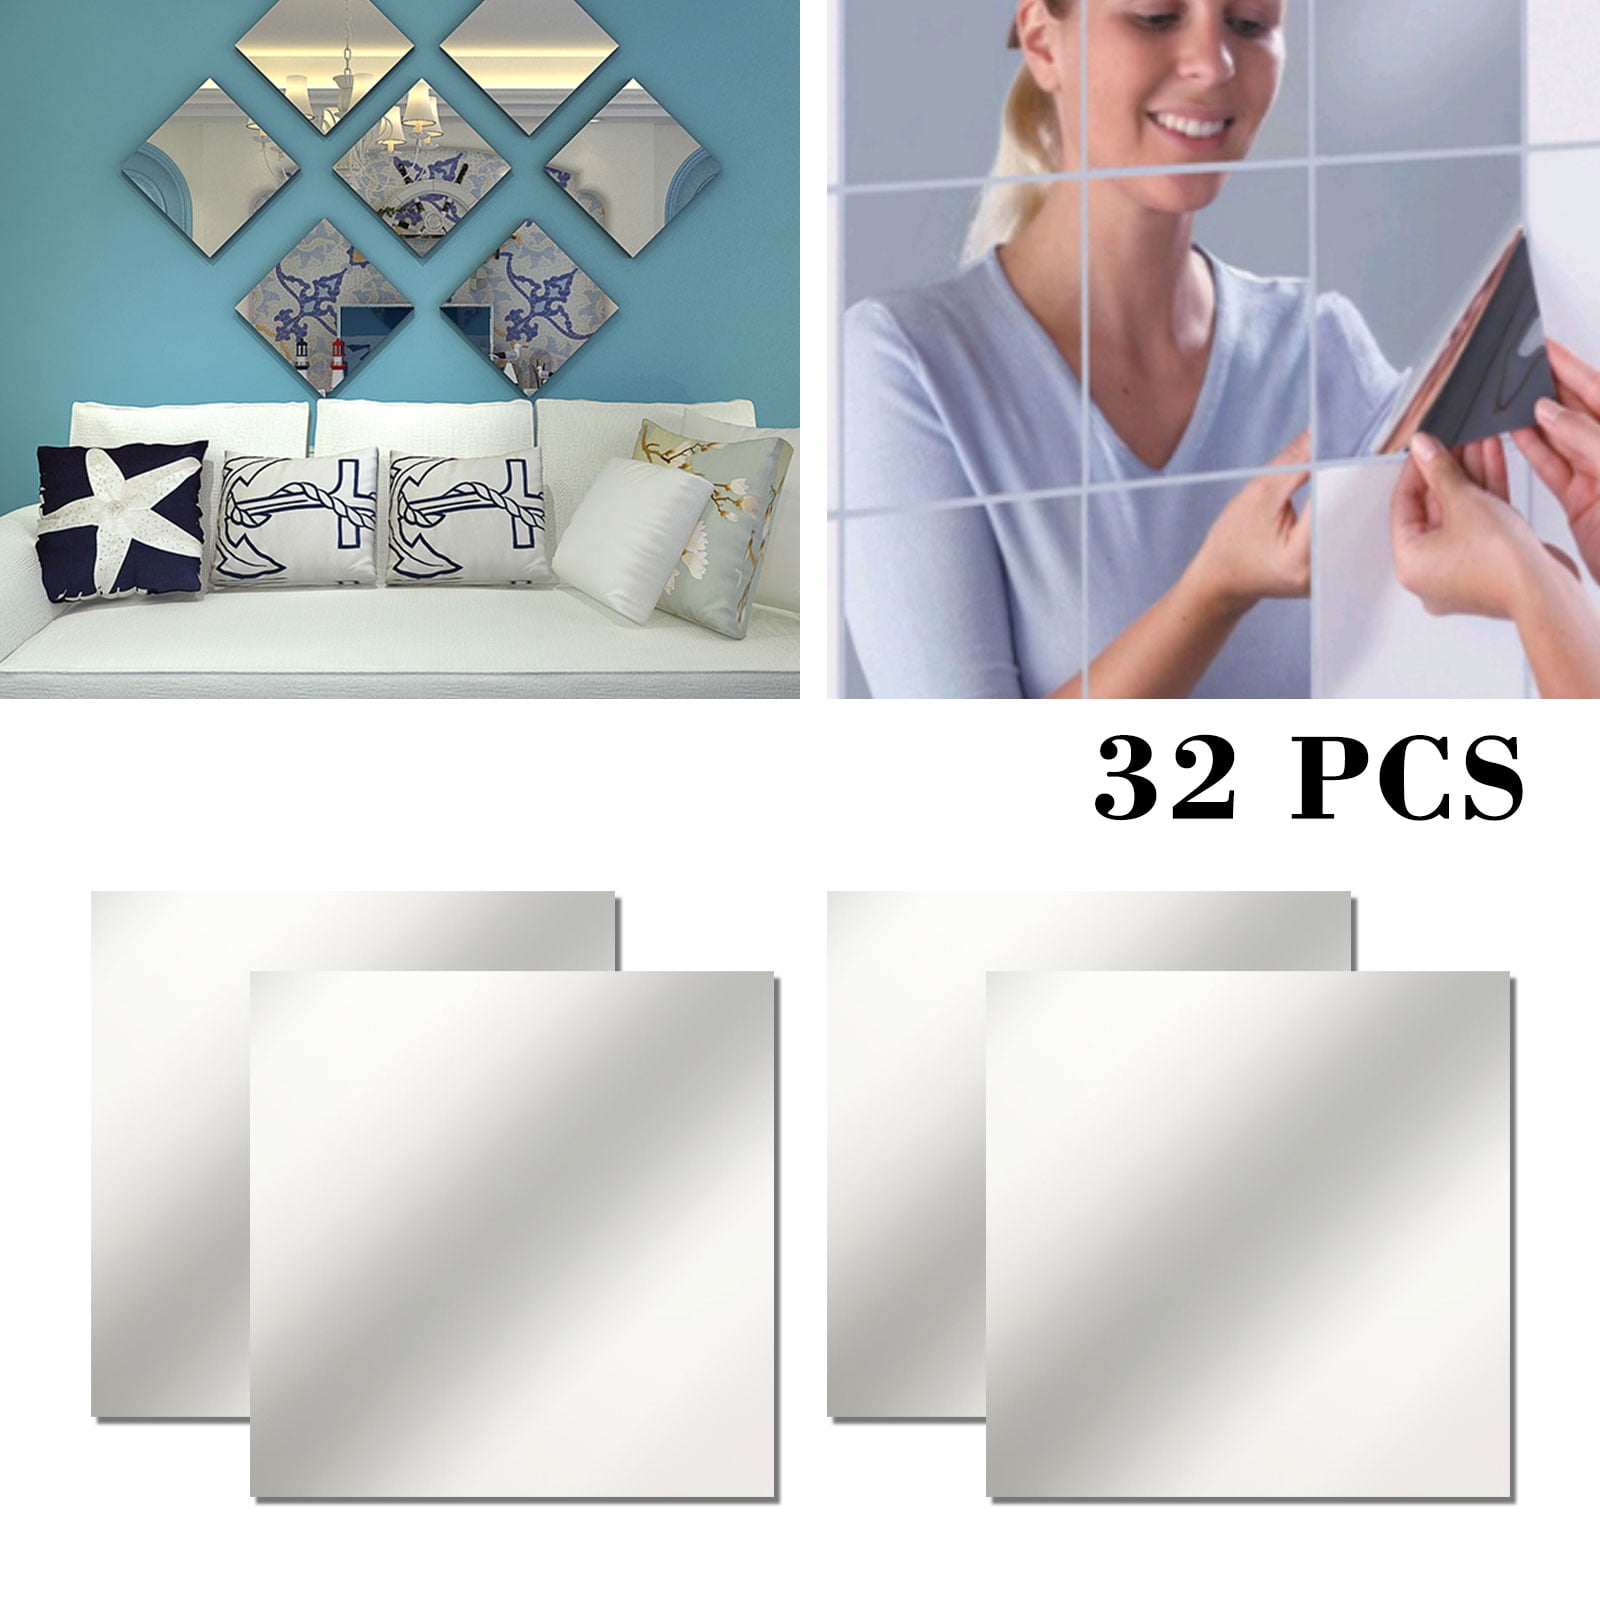 Details about   40/80Pcs 15cm Mirror Glass Tile Self Adhesive Wall Stickers Decal Wall Decor 